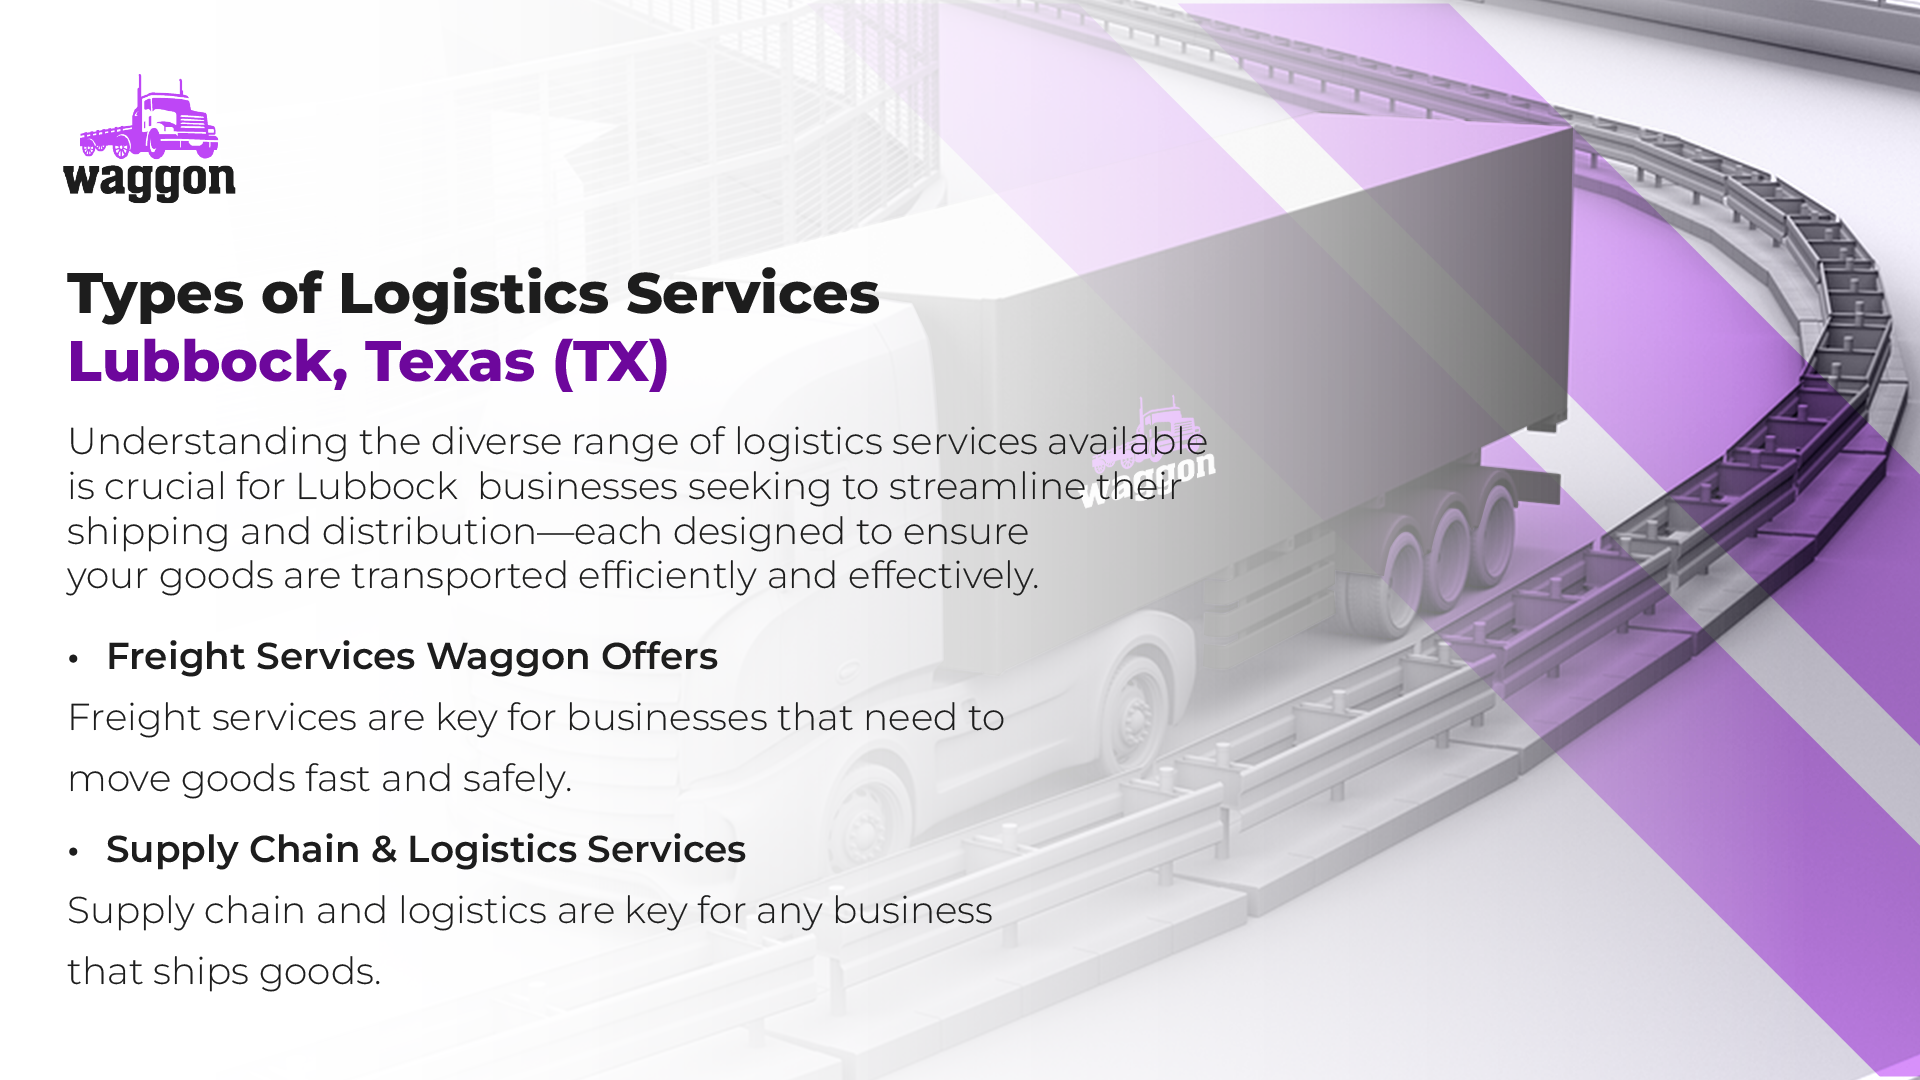 Types of Logistics Services in Lubbock, Texas (TX)